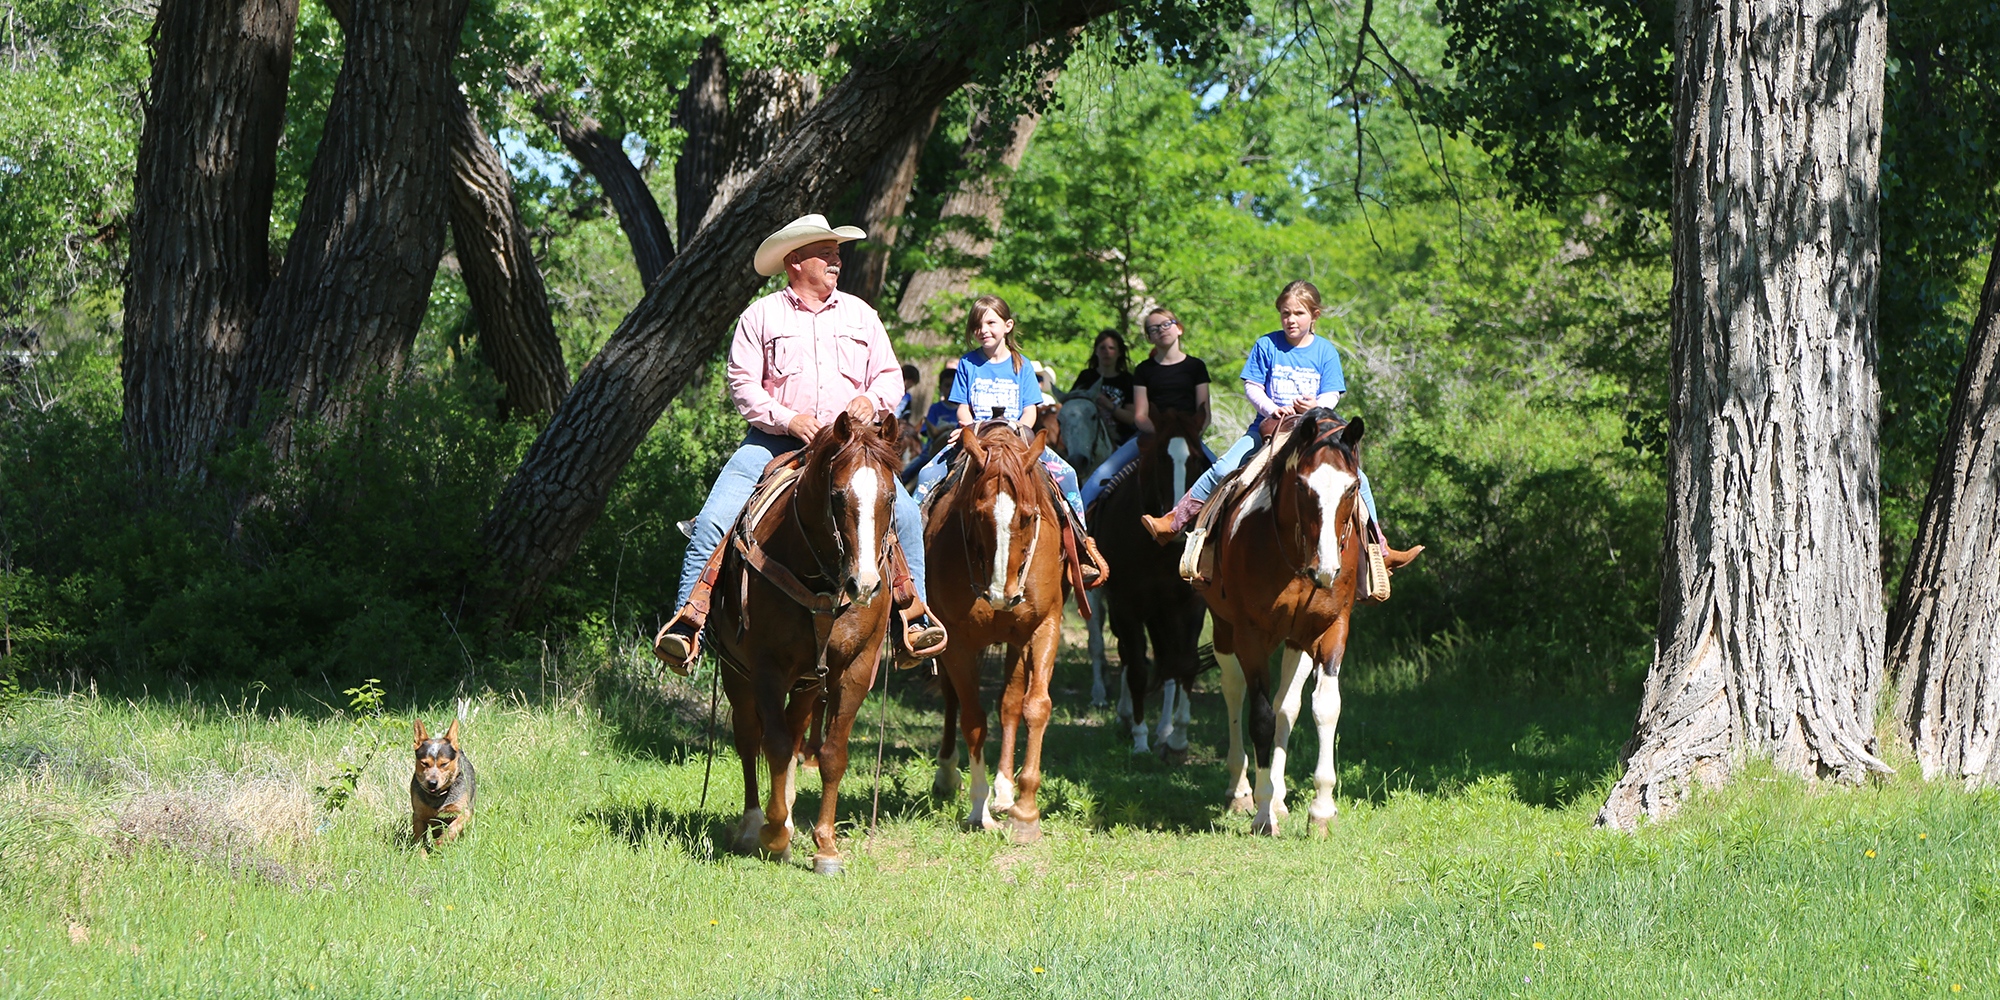 Staff and Youth Riding Horses